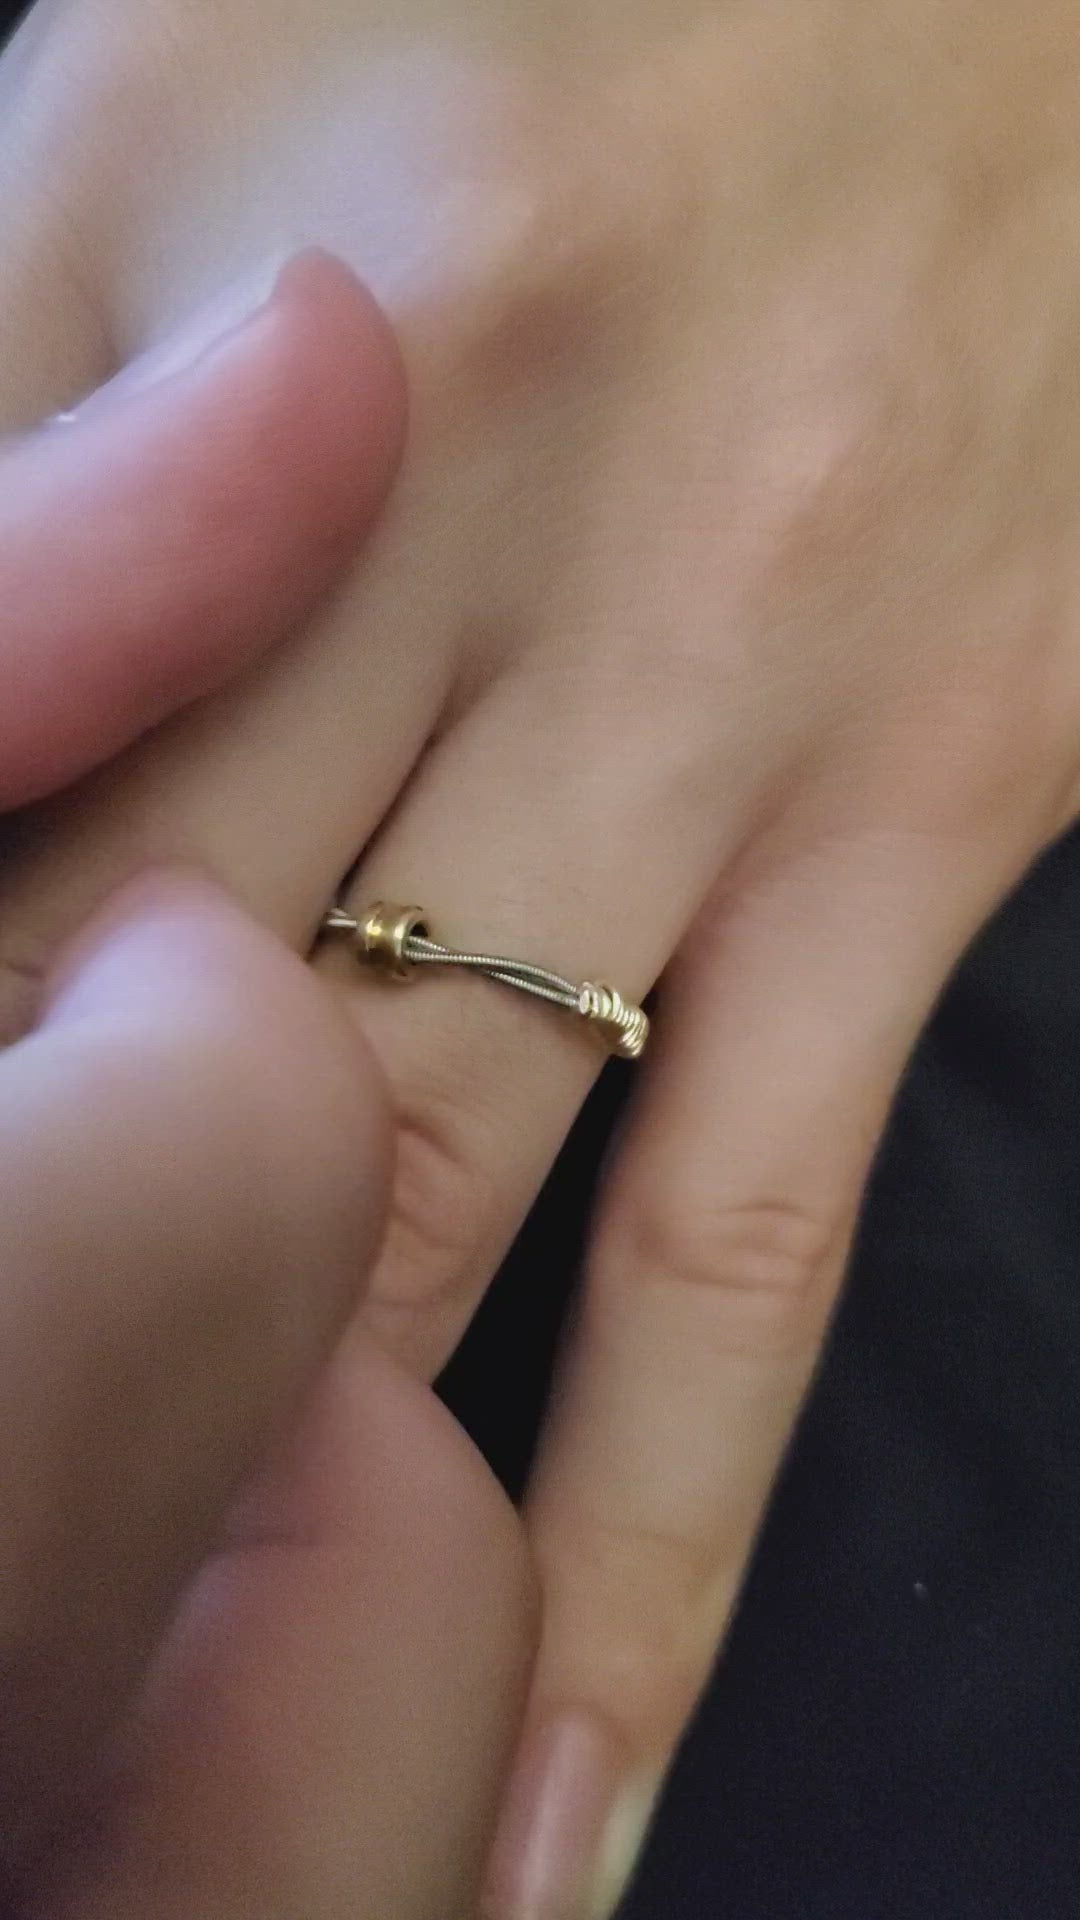 video of a hand wearing a guitar string fidget ring with a gold coloured ballend the fingers of a second hand is flicking the ballend to make it move